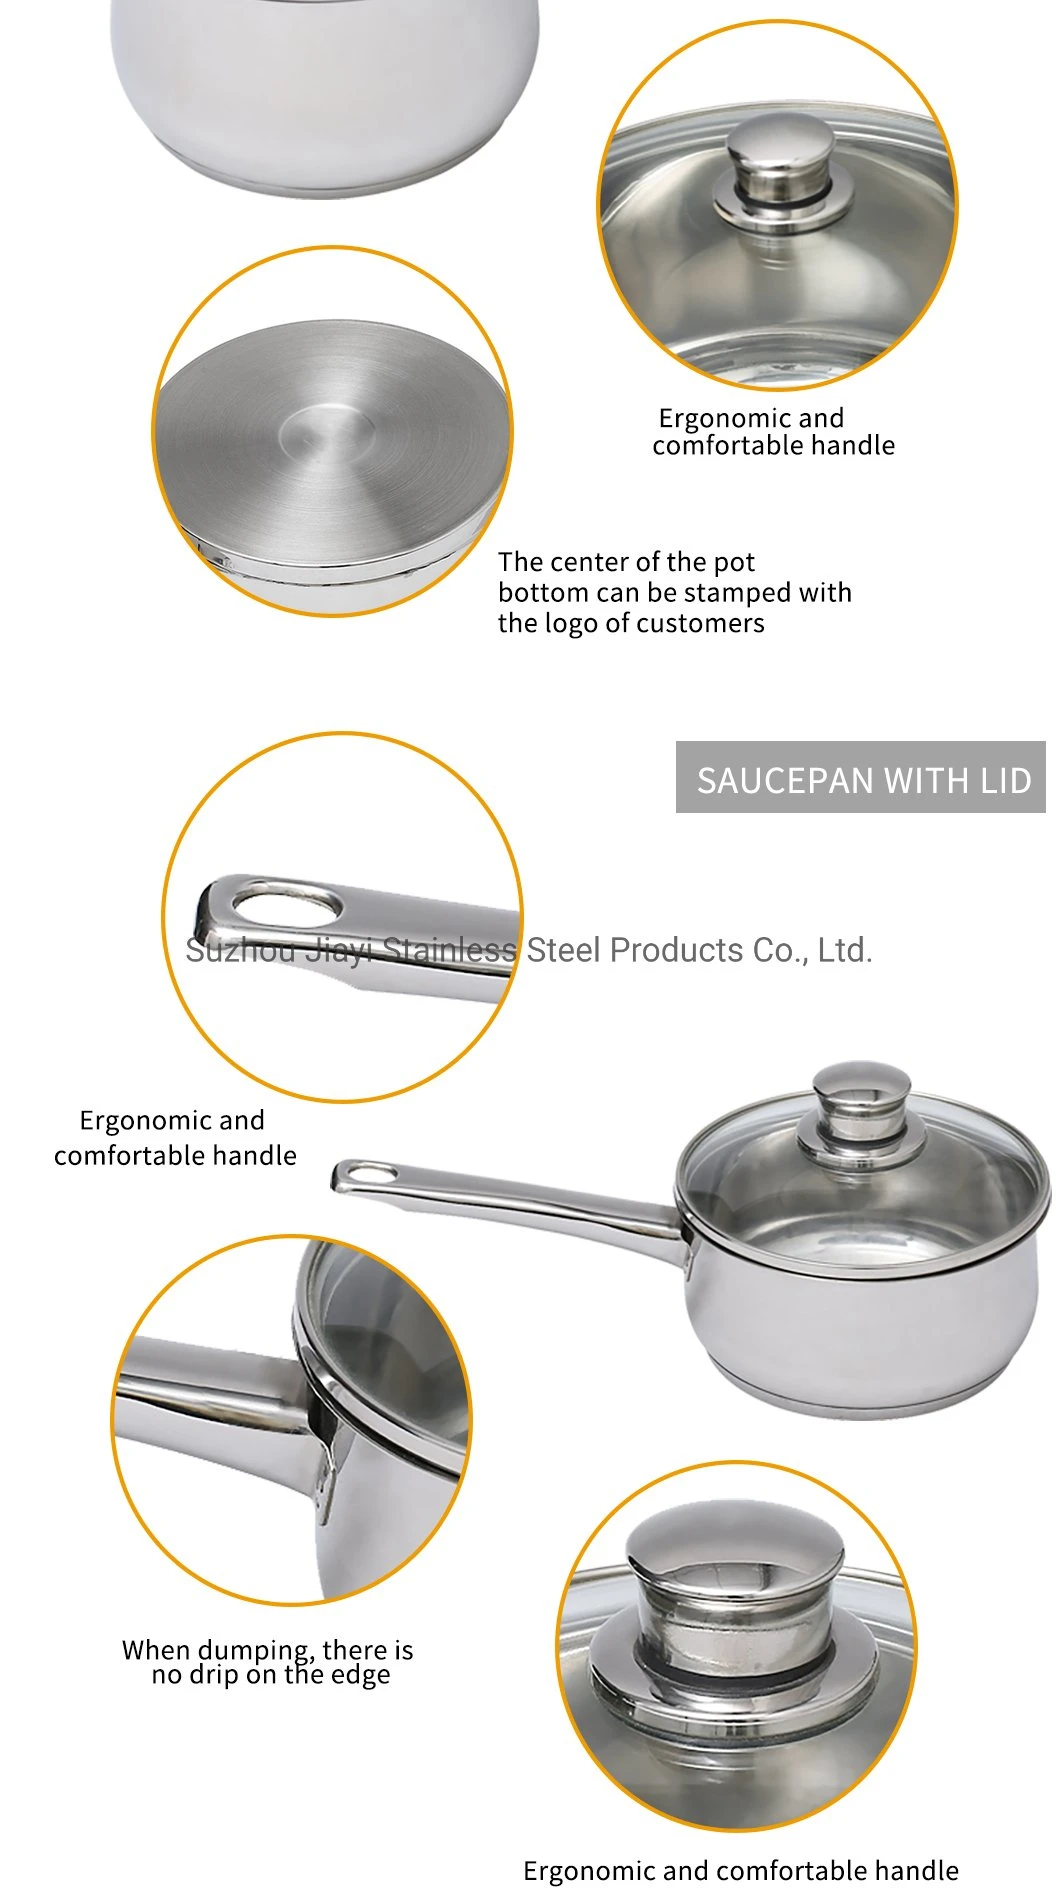 Wholesale Customized Home Kitchen Ware Casserole Ss Saucepan Stainless Steel Cooking Pot SUS304 Saucepan